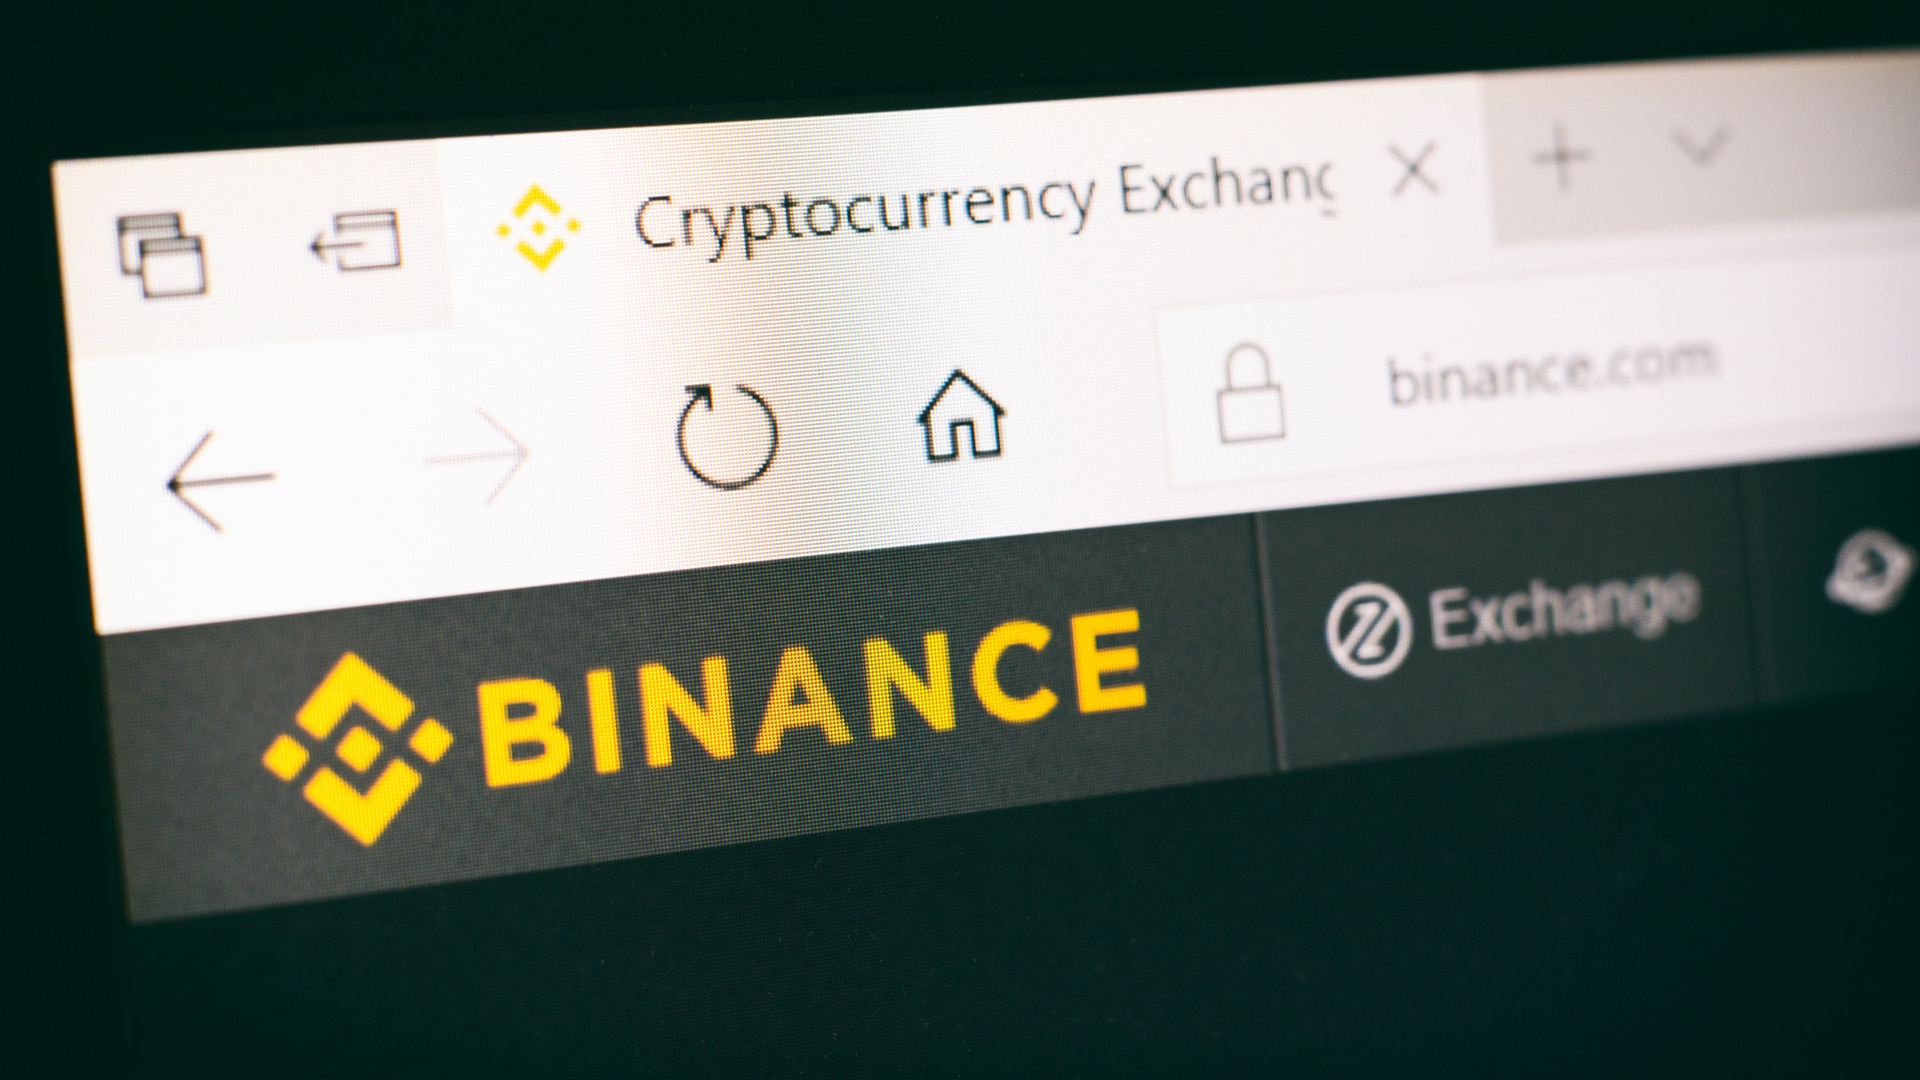 Brazilian loses BRL 100,000 on Binance with 250 withdrawals in just 10 minutes